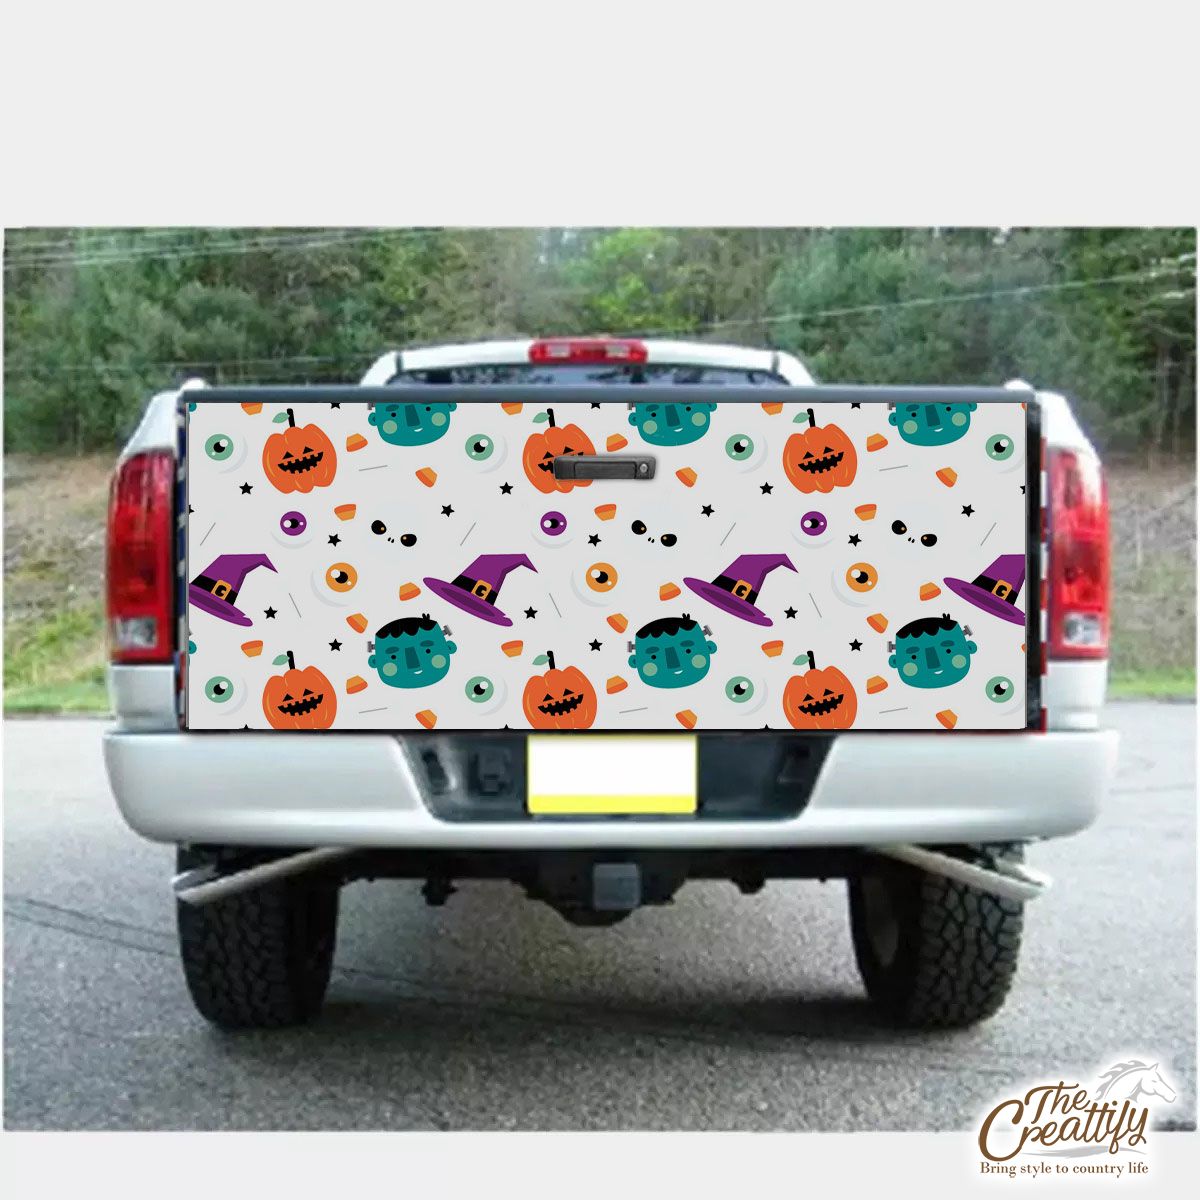 Funny Halloween Pumpkin Face, Jack O Lantern, Halloween Skeleton, Wicked Witches 1 Truck Bed Decal